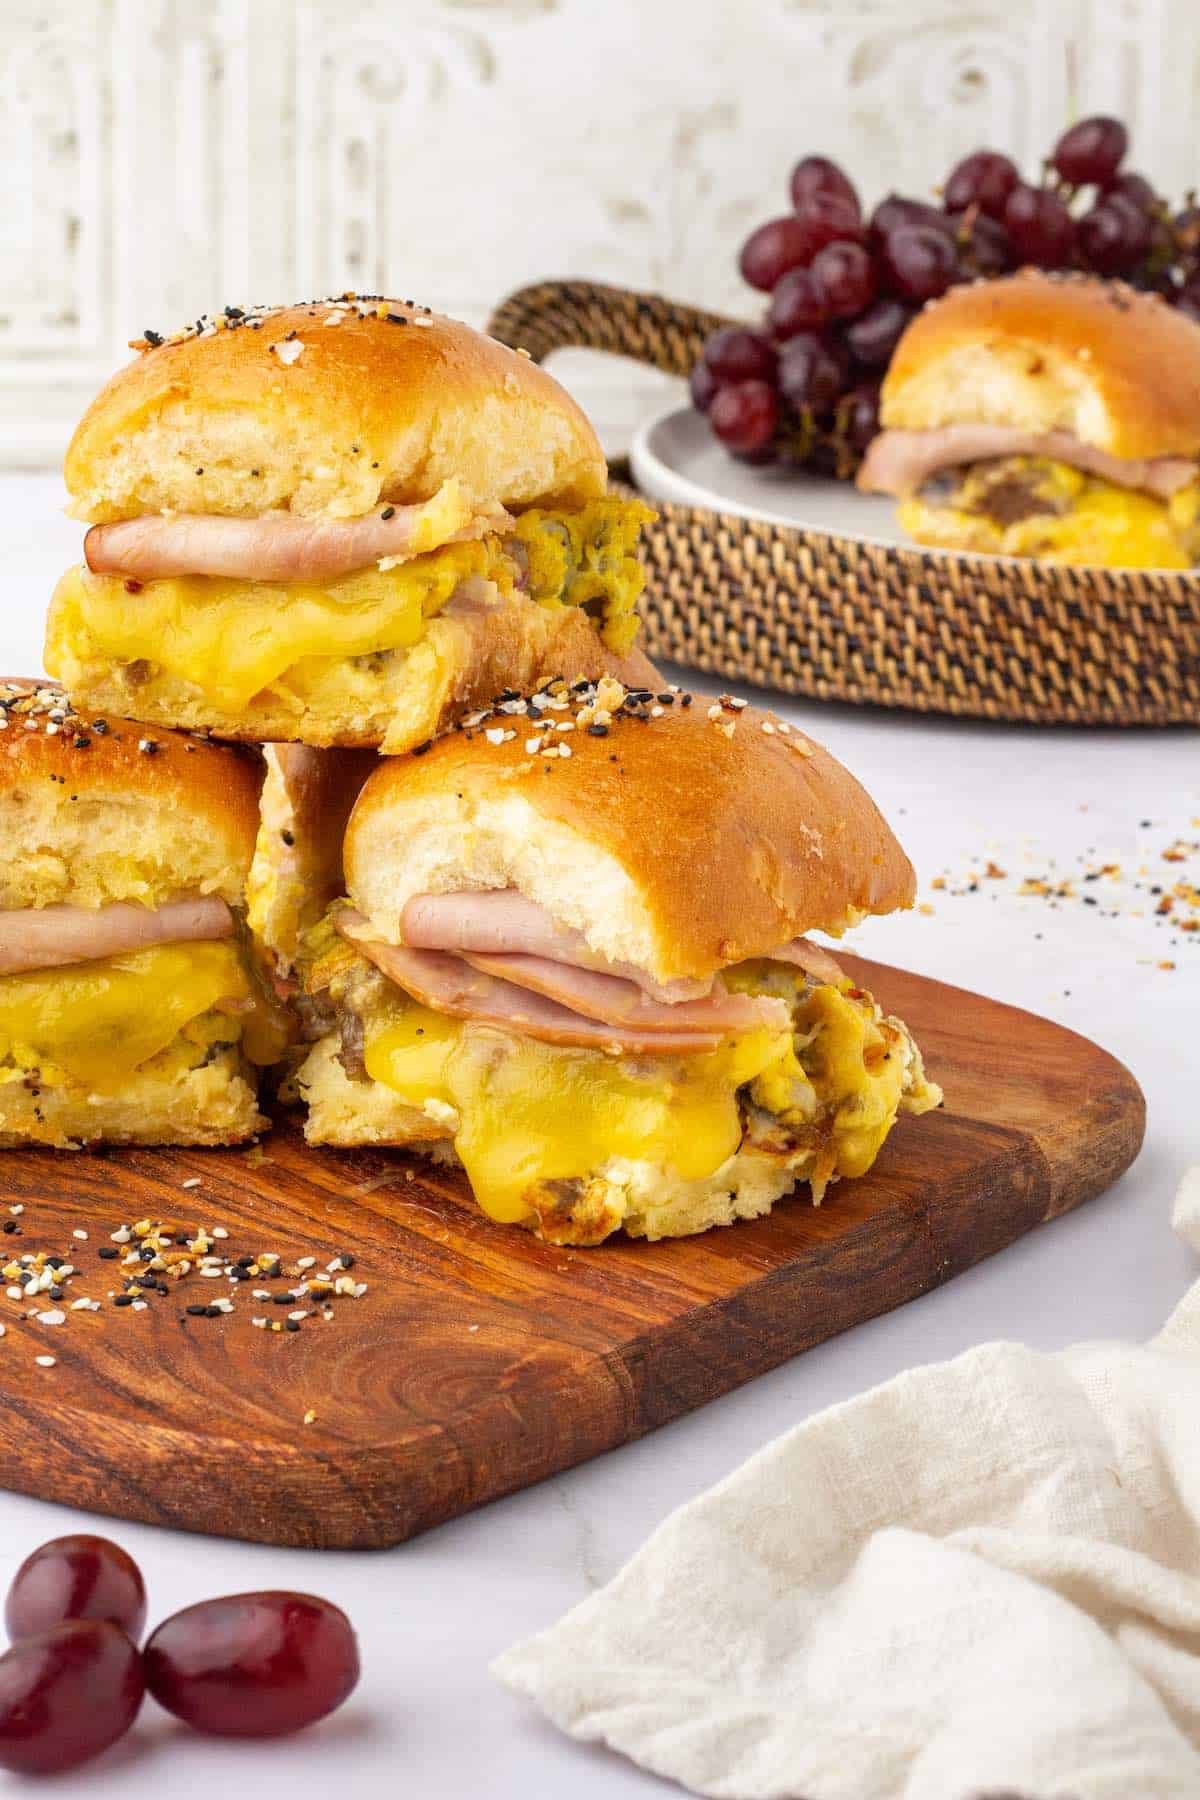 Stacked breakfast sliders showing eggs, ham and cheese.